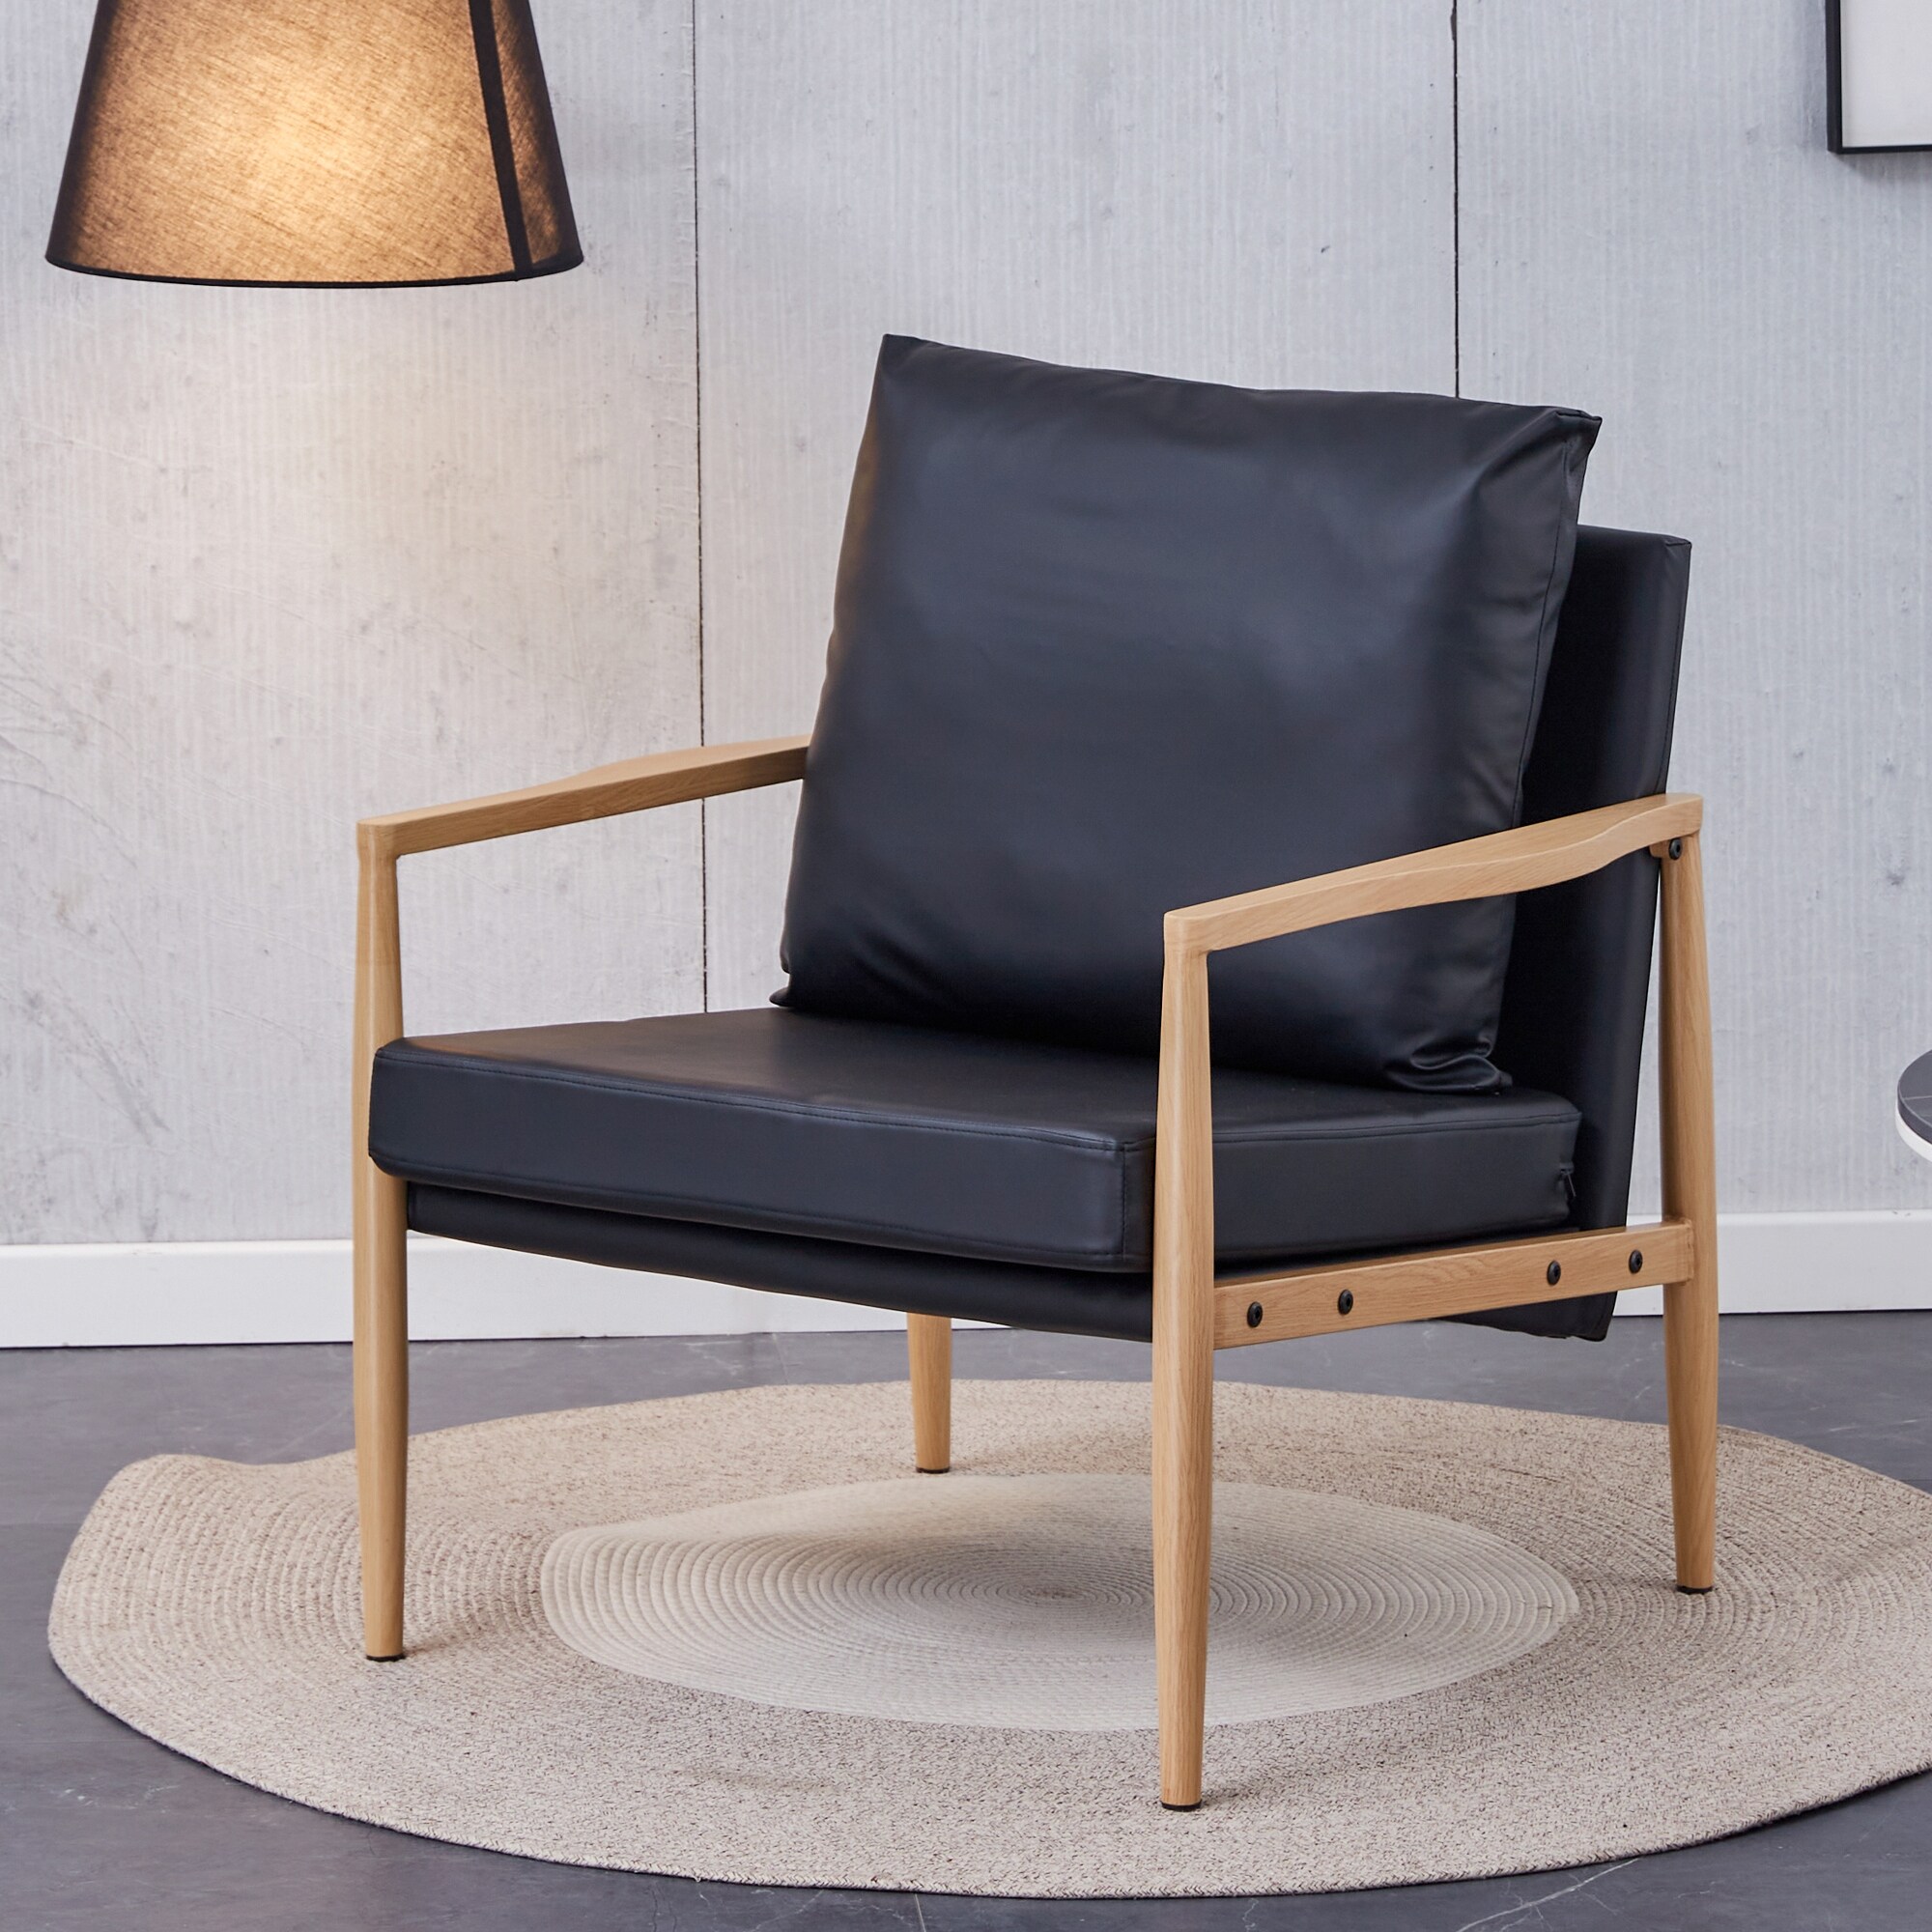 https://ak1.ostkcdn.com/images/products/is/images/direct/9b99a173bffa6c55c805cd4cecd597b2fac47c8b/Sofa-Chair-Set-of-2%2C-PU-Leather-Accent-Arm-Chair%2C-Upholstered-Armchair-with-Metal-Frame-Padded-Backrest-and-Seat-Cushion-Sofa.jpg